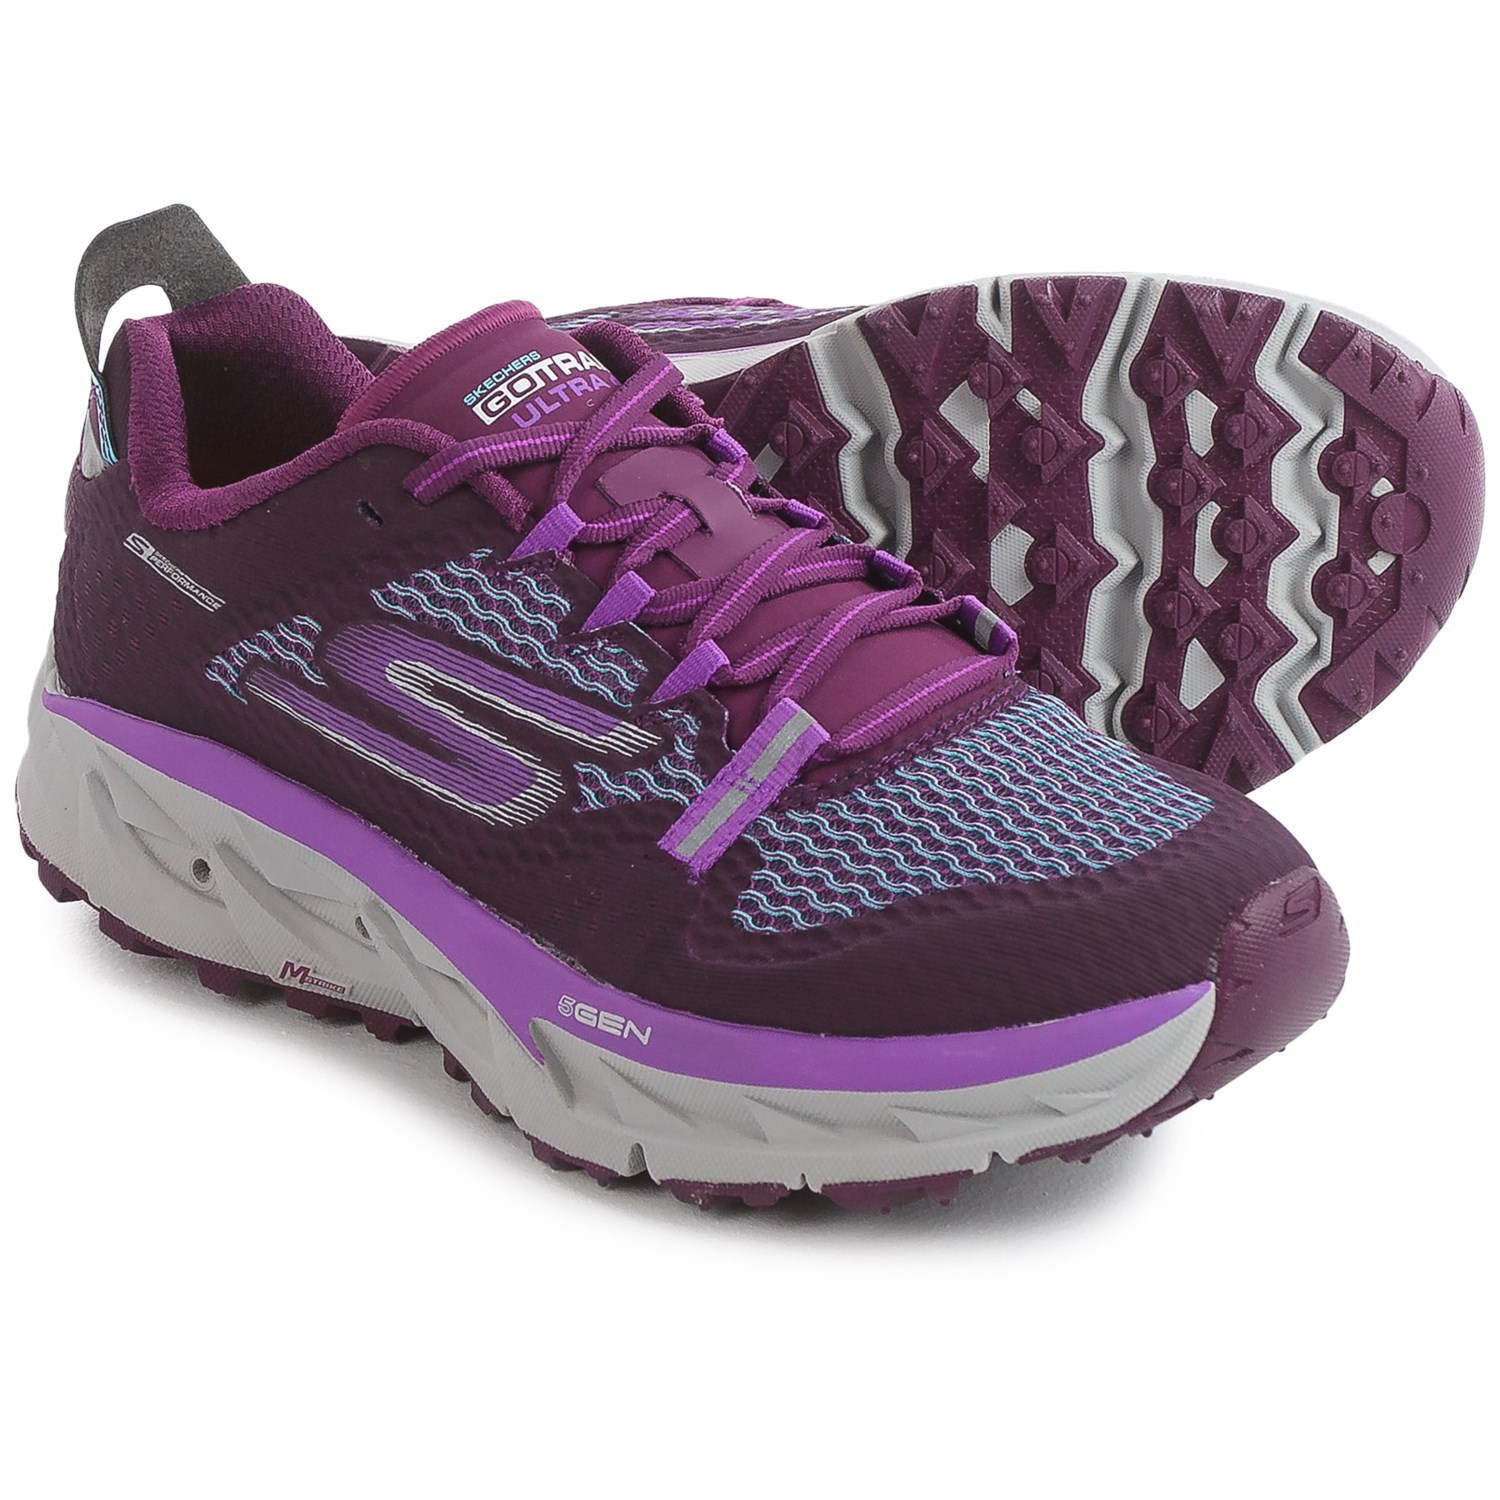 Skechers GOtrail Ultra 4 Trail Running Shoes (For Women) - Save 56%